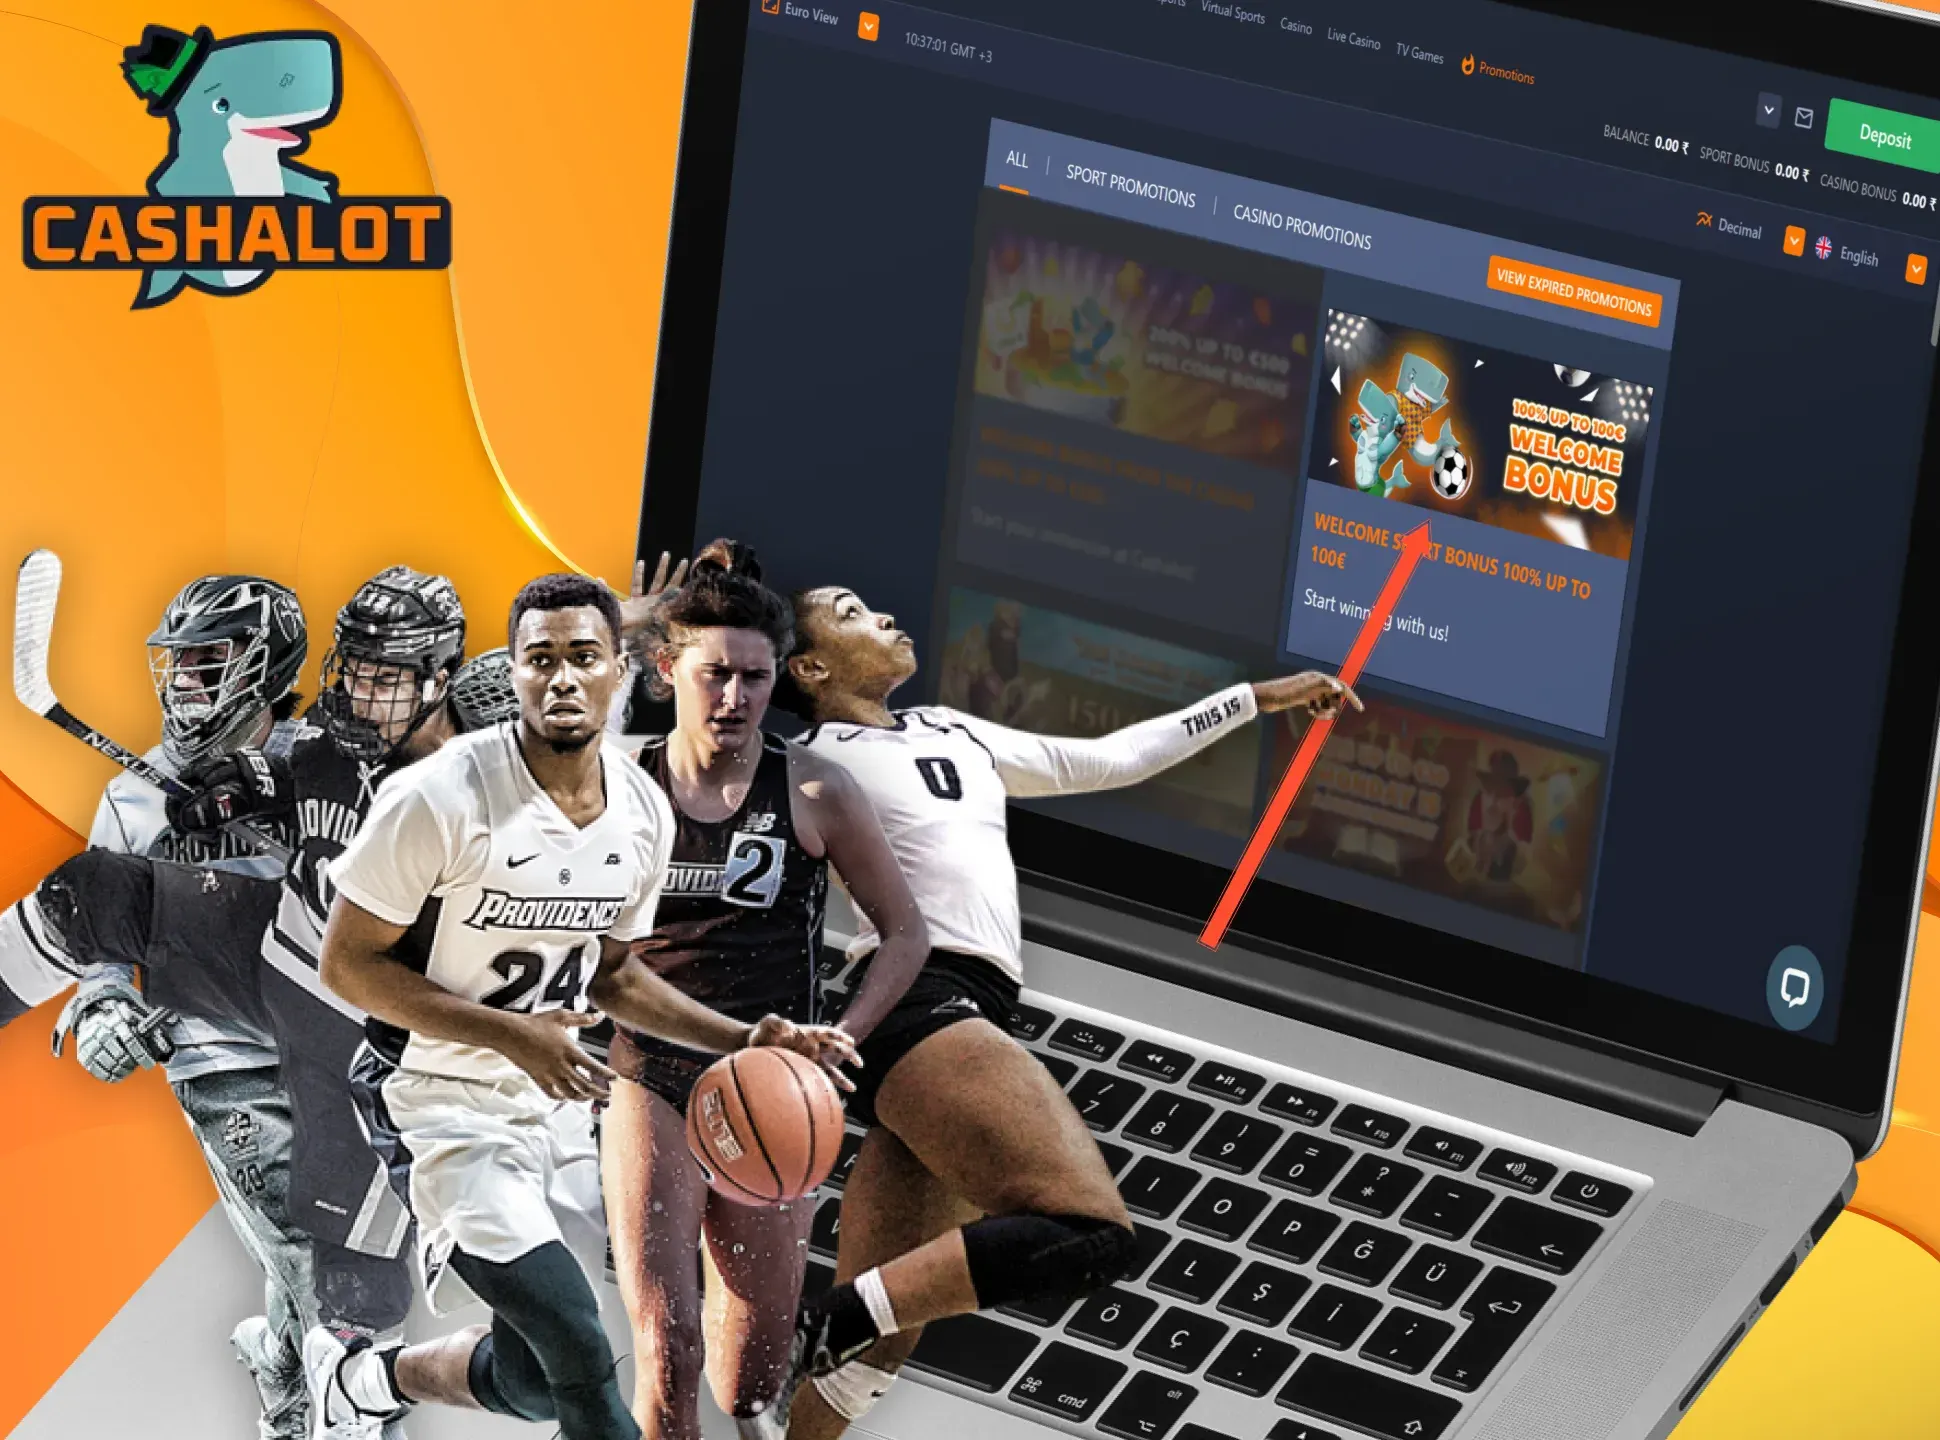 Get your Cashalot sports bonus after making some bets.